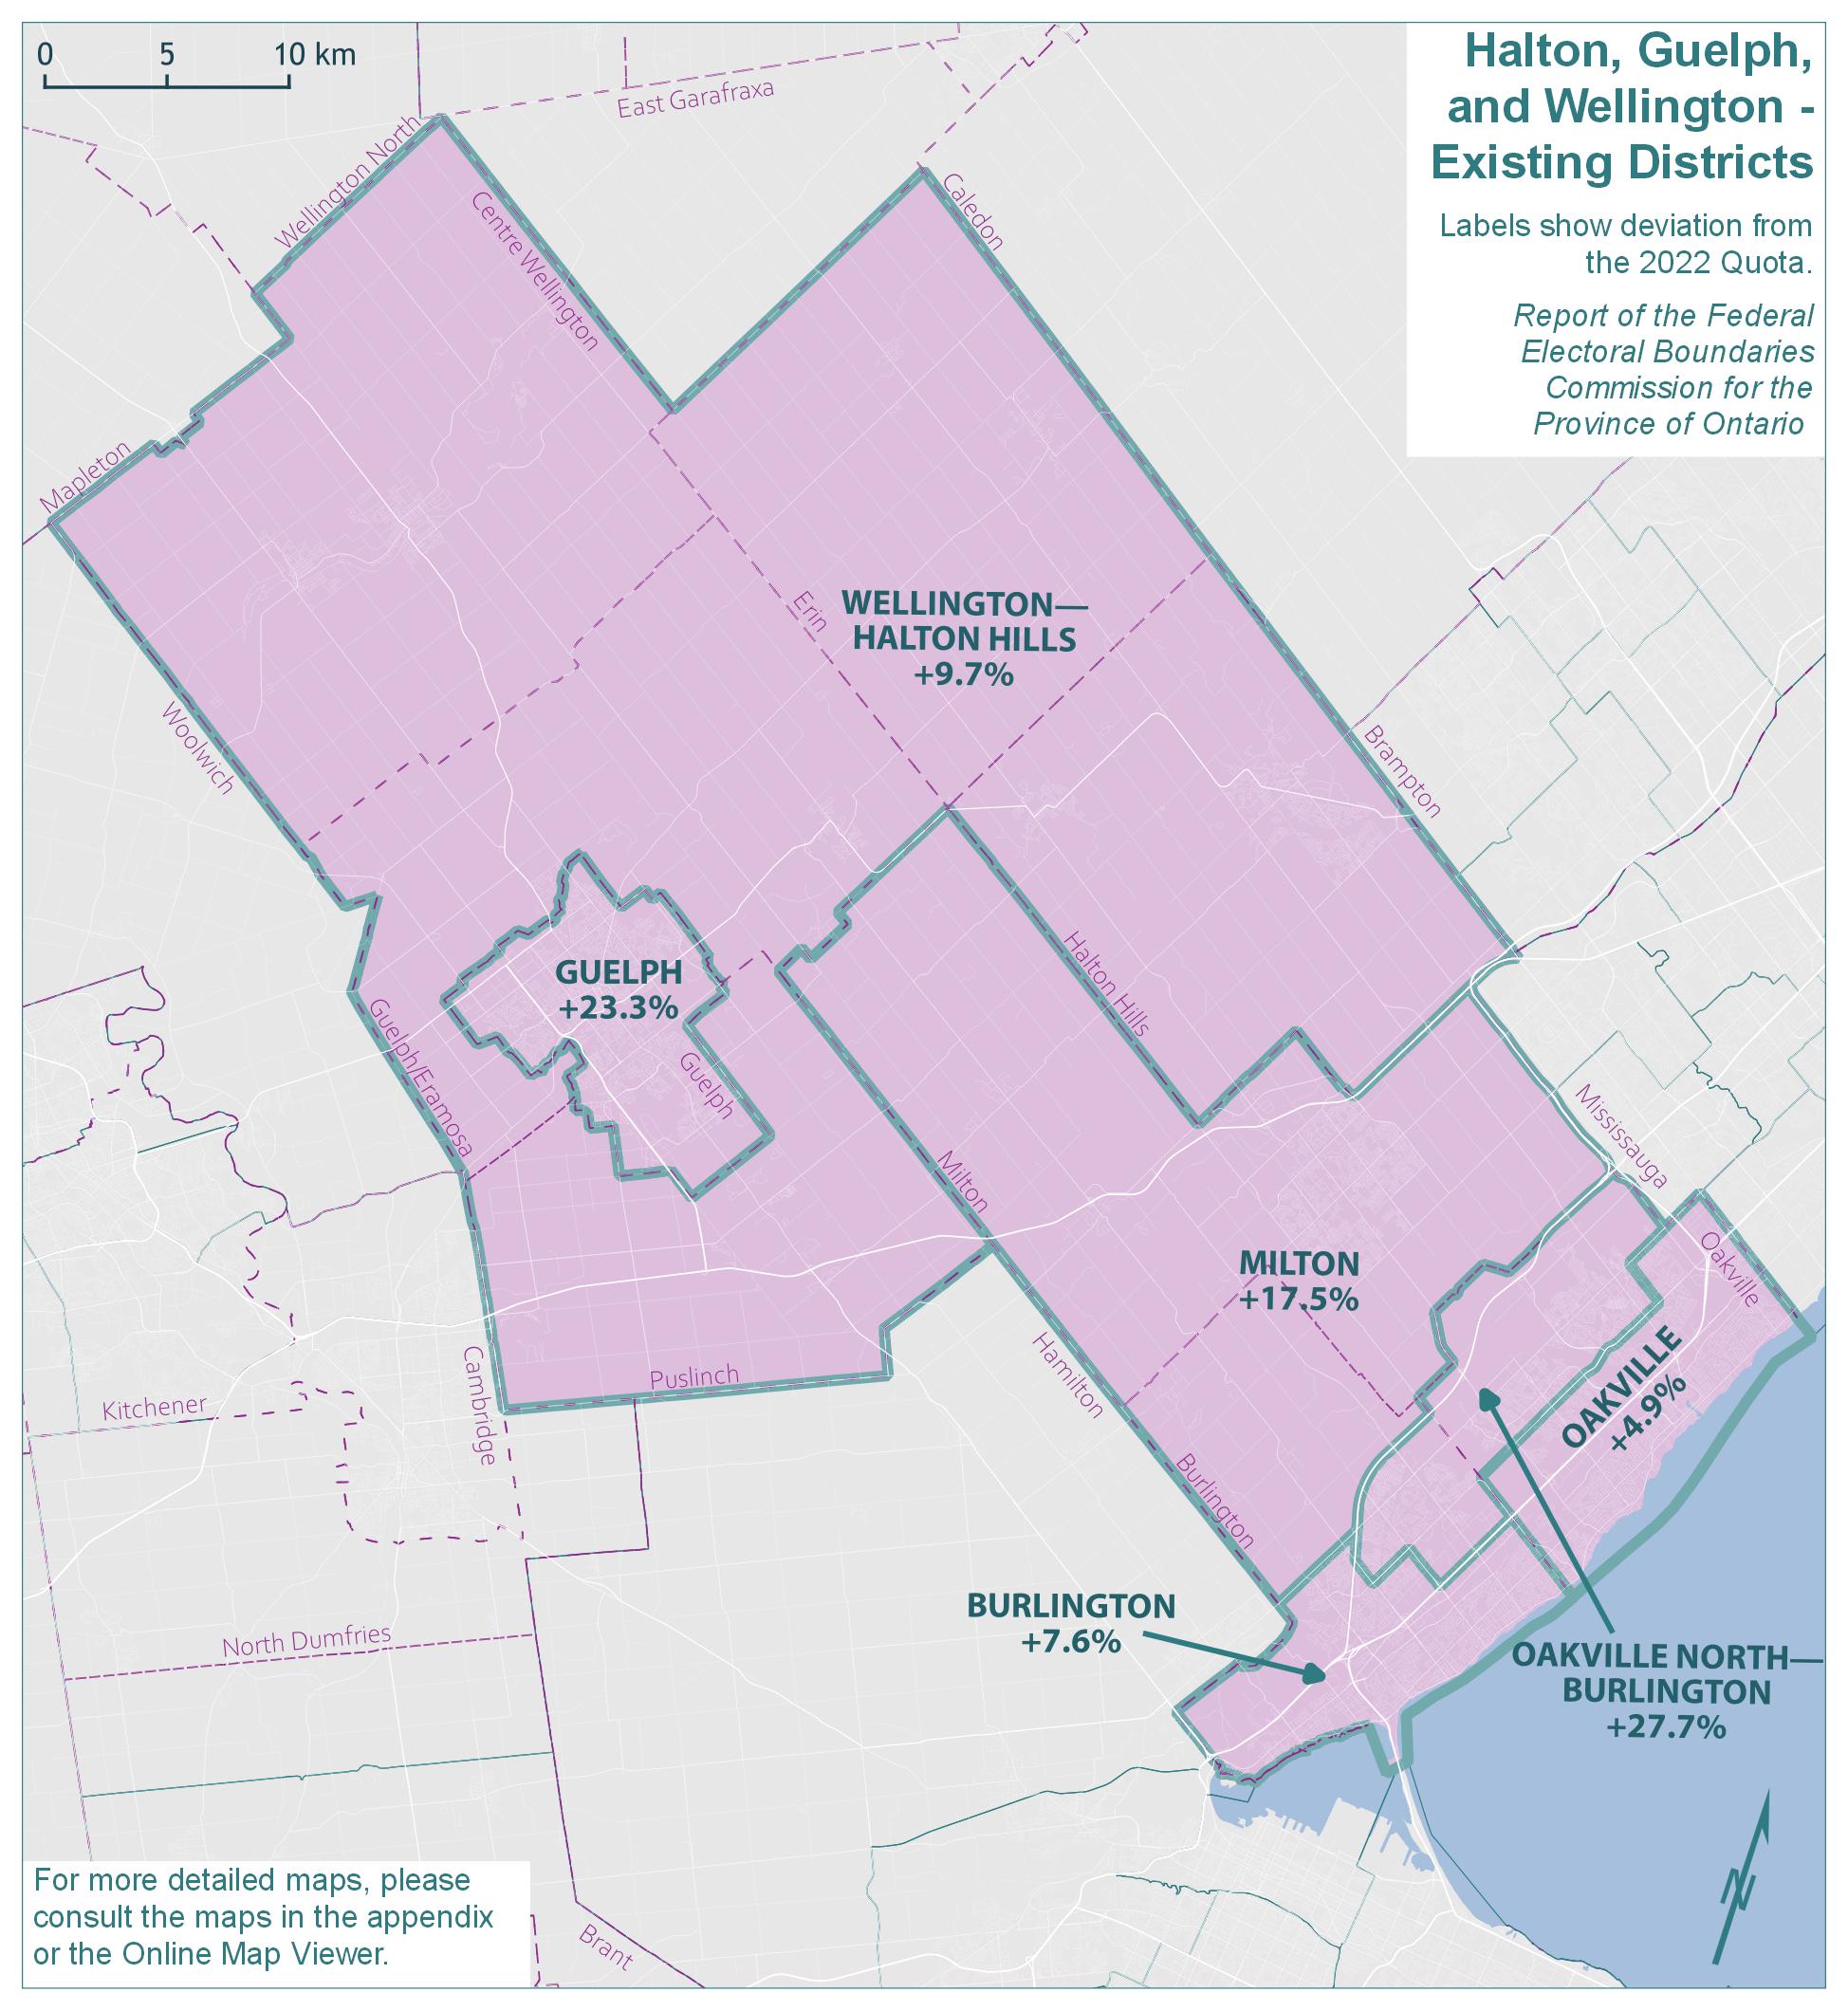 Halton, Guelph, and Wellington - Existing Districts